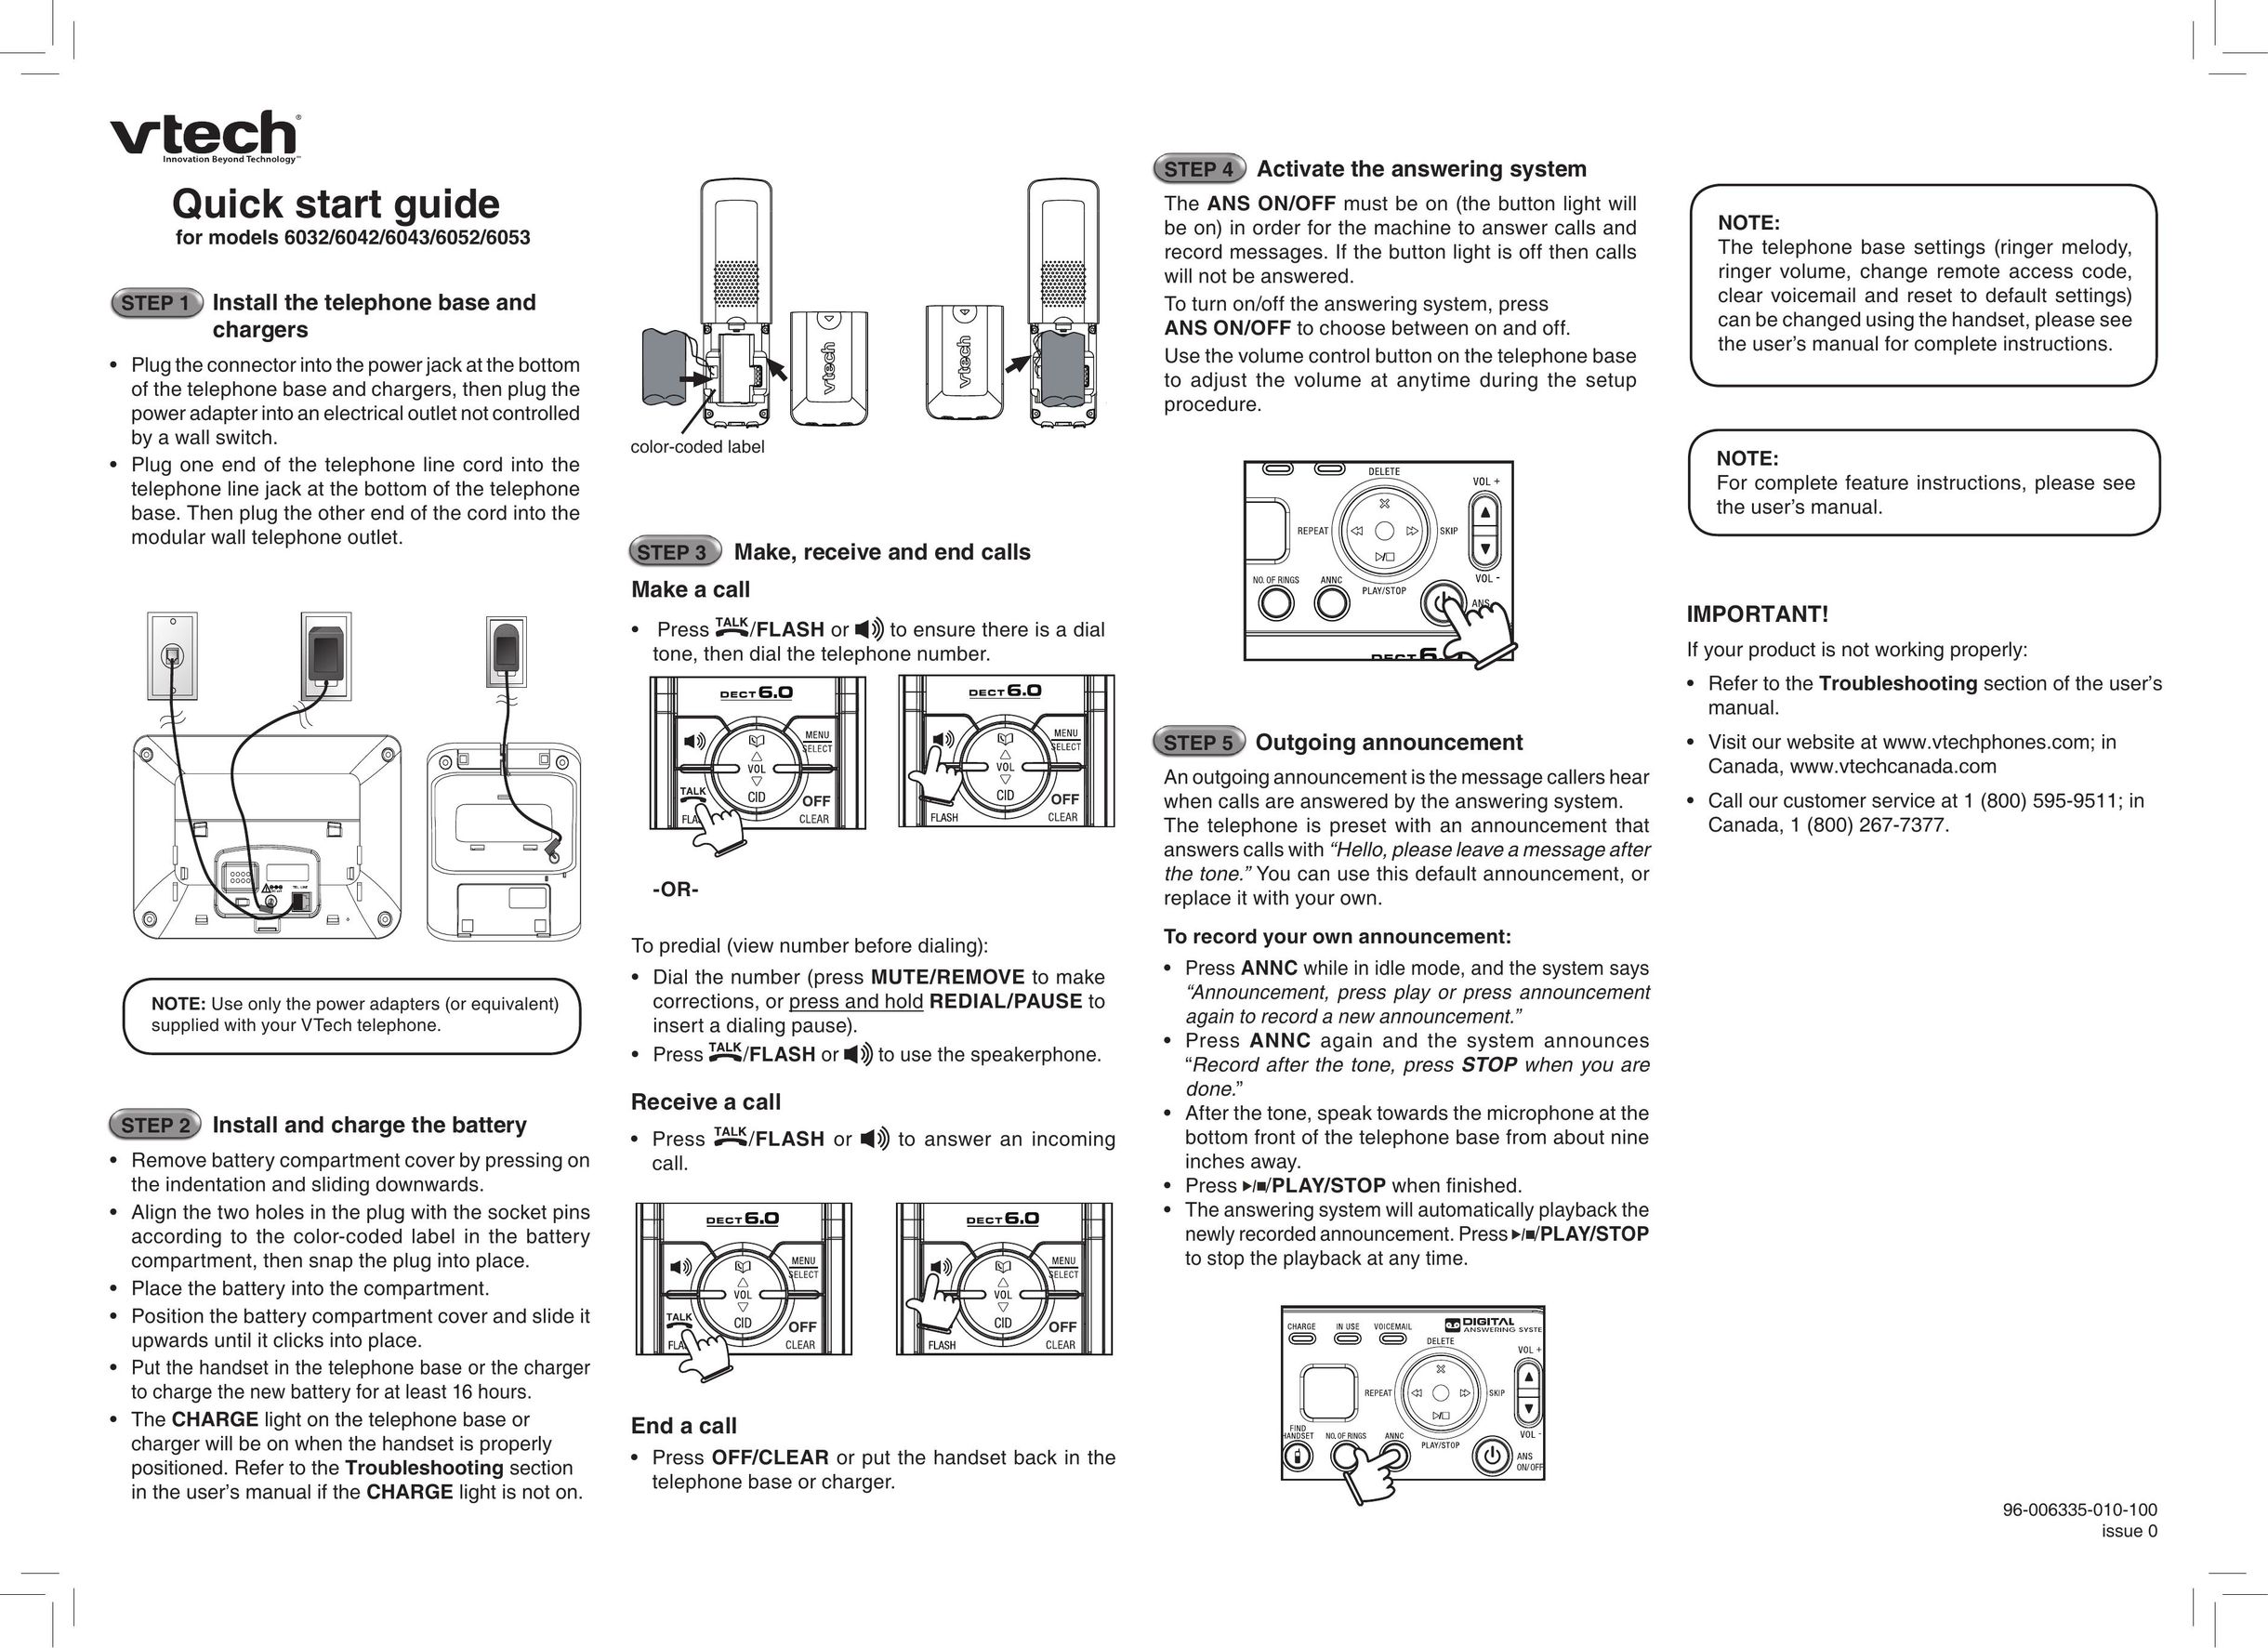 VTech 6052 Home Security System User Manual